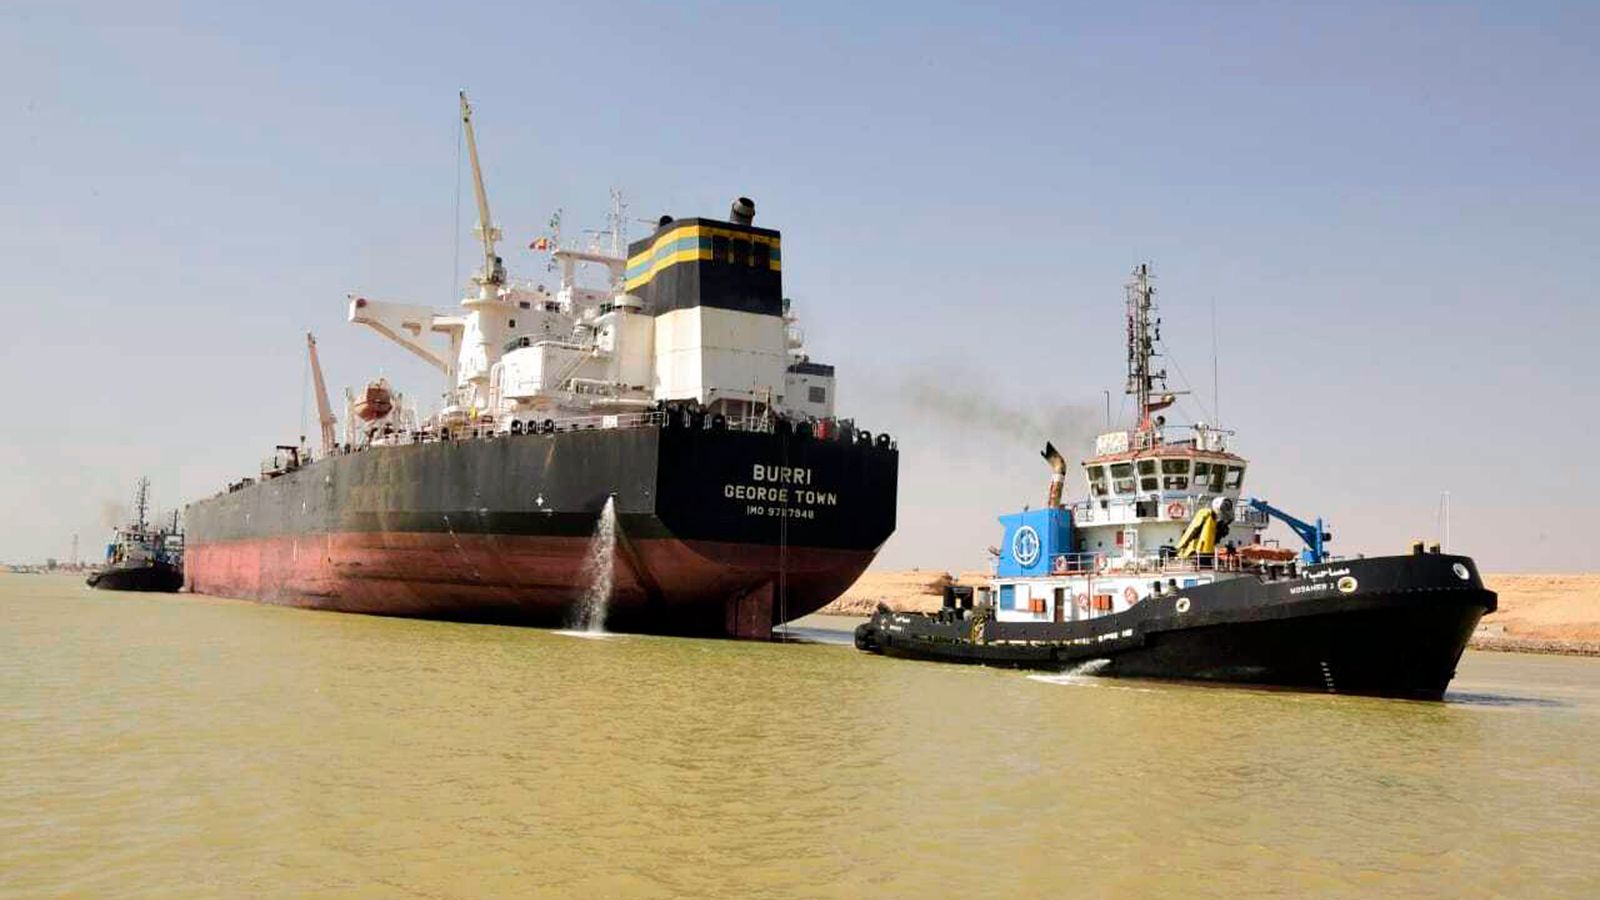 Two tankers collide in Suez Canal disrupting traffic